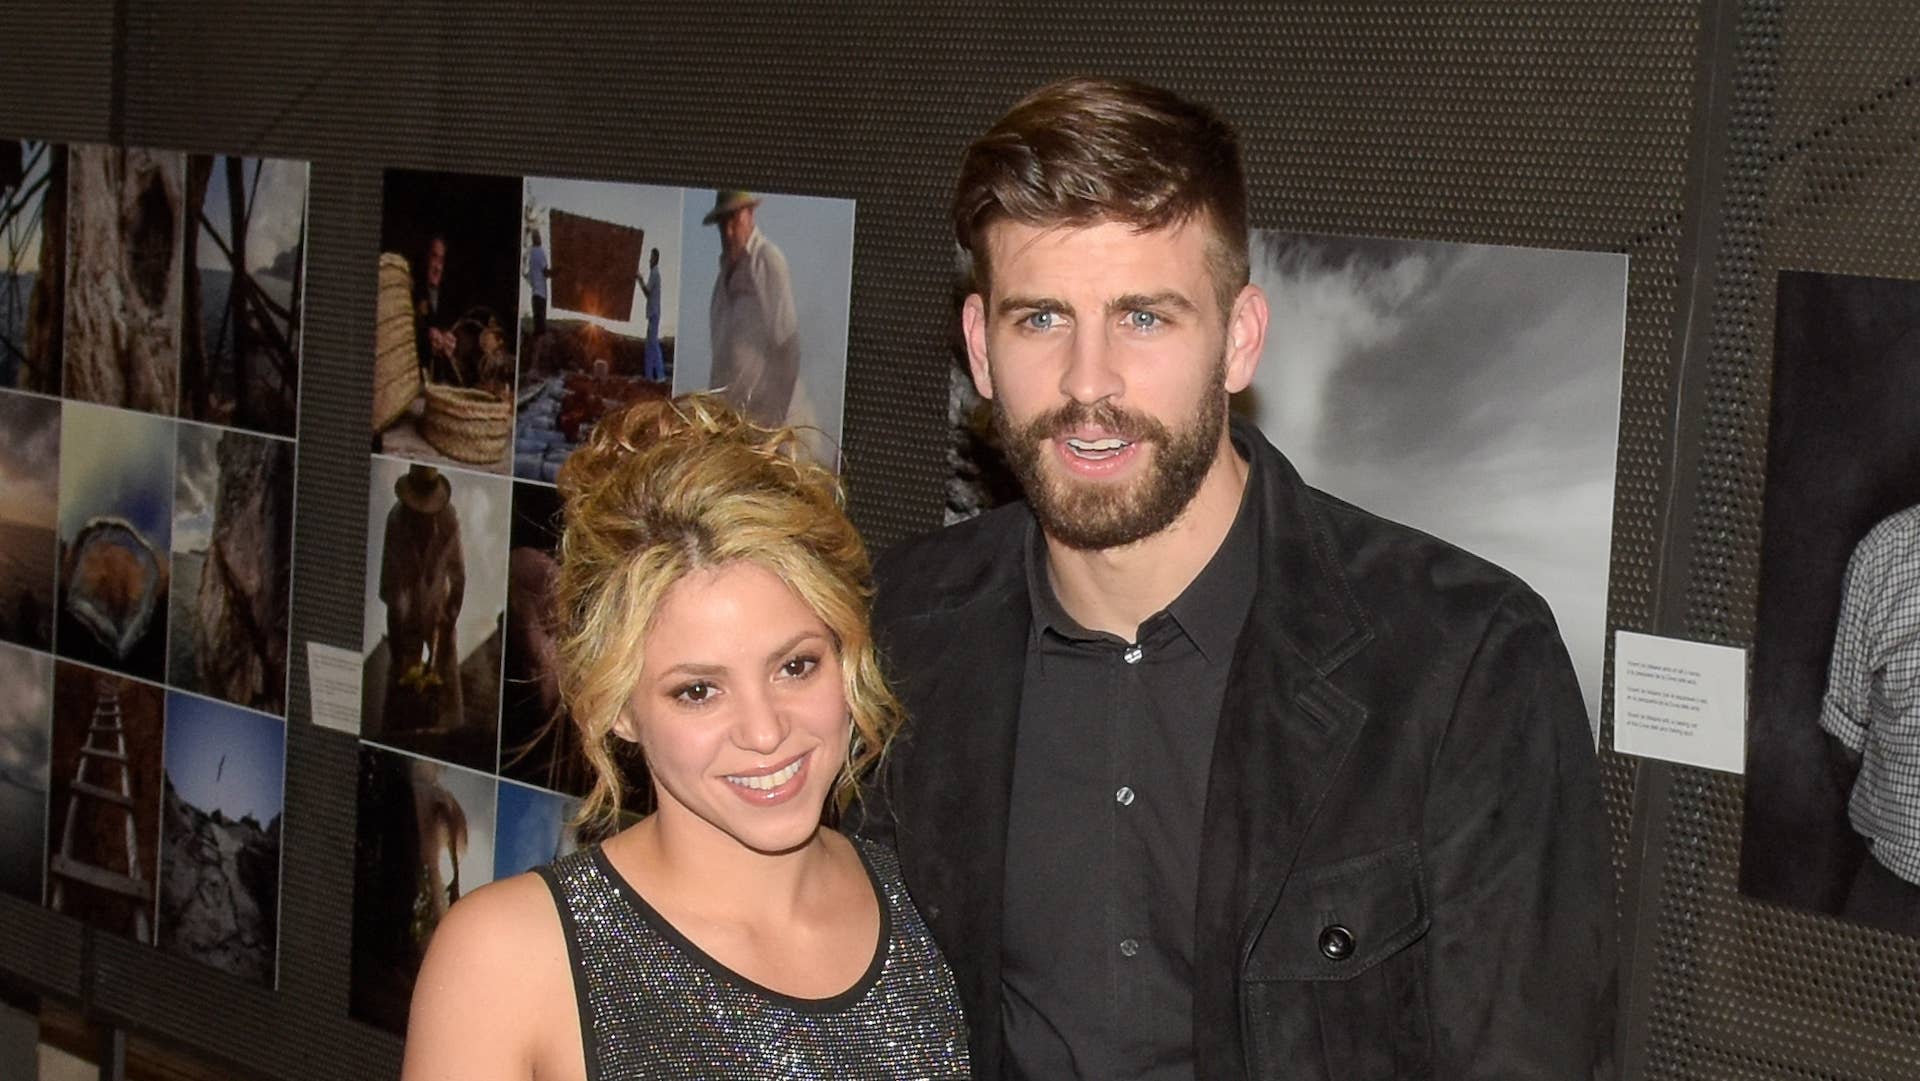 This is an image of Shakira on the left and Gerard Pique on the right